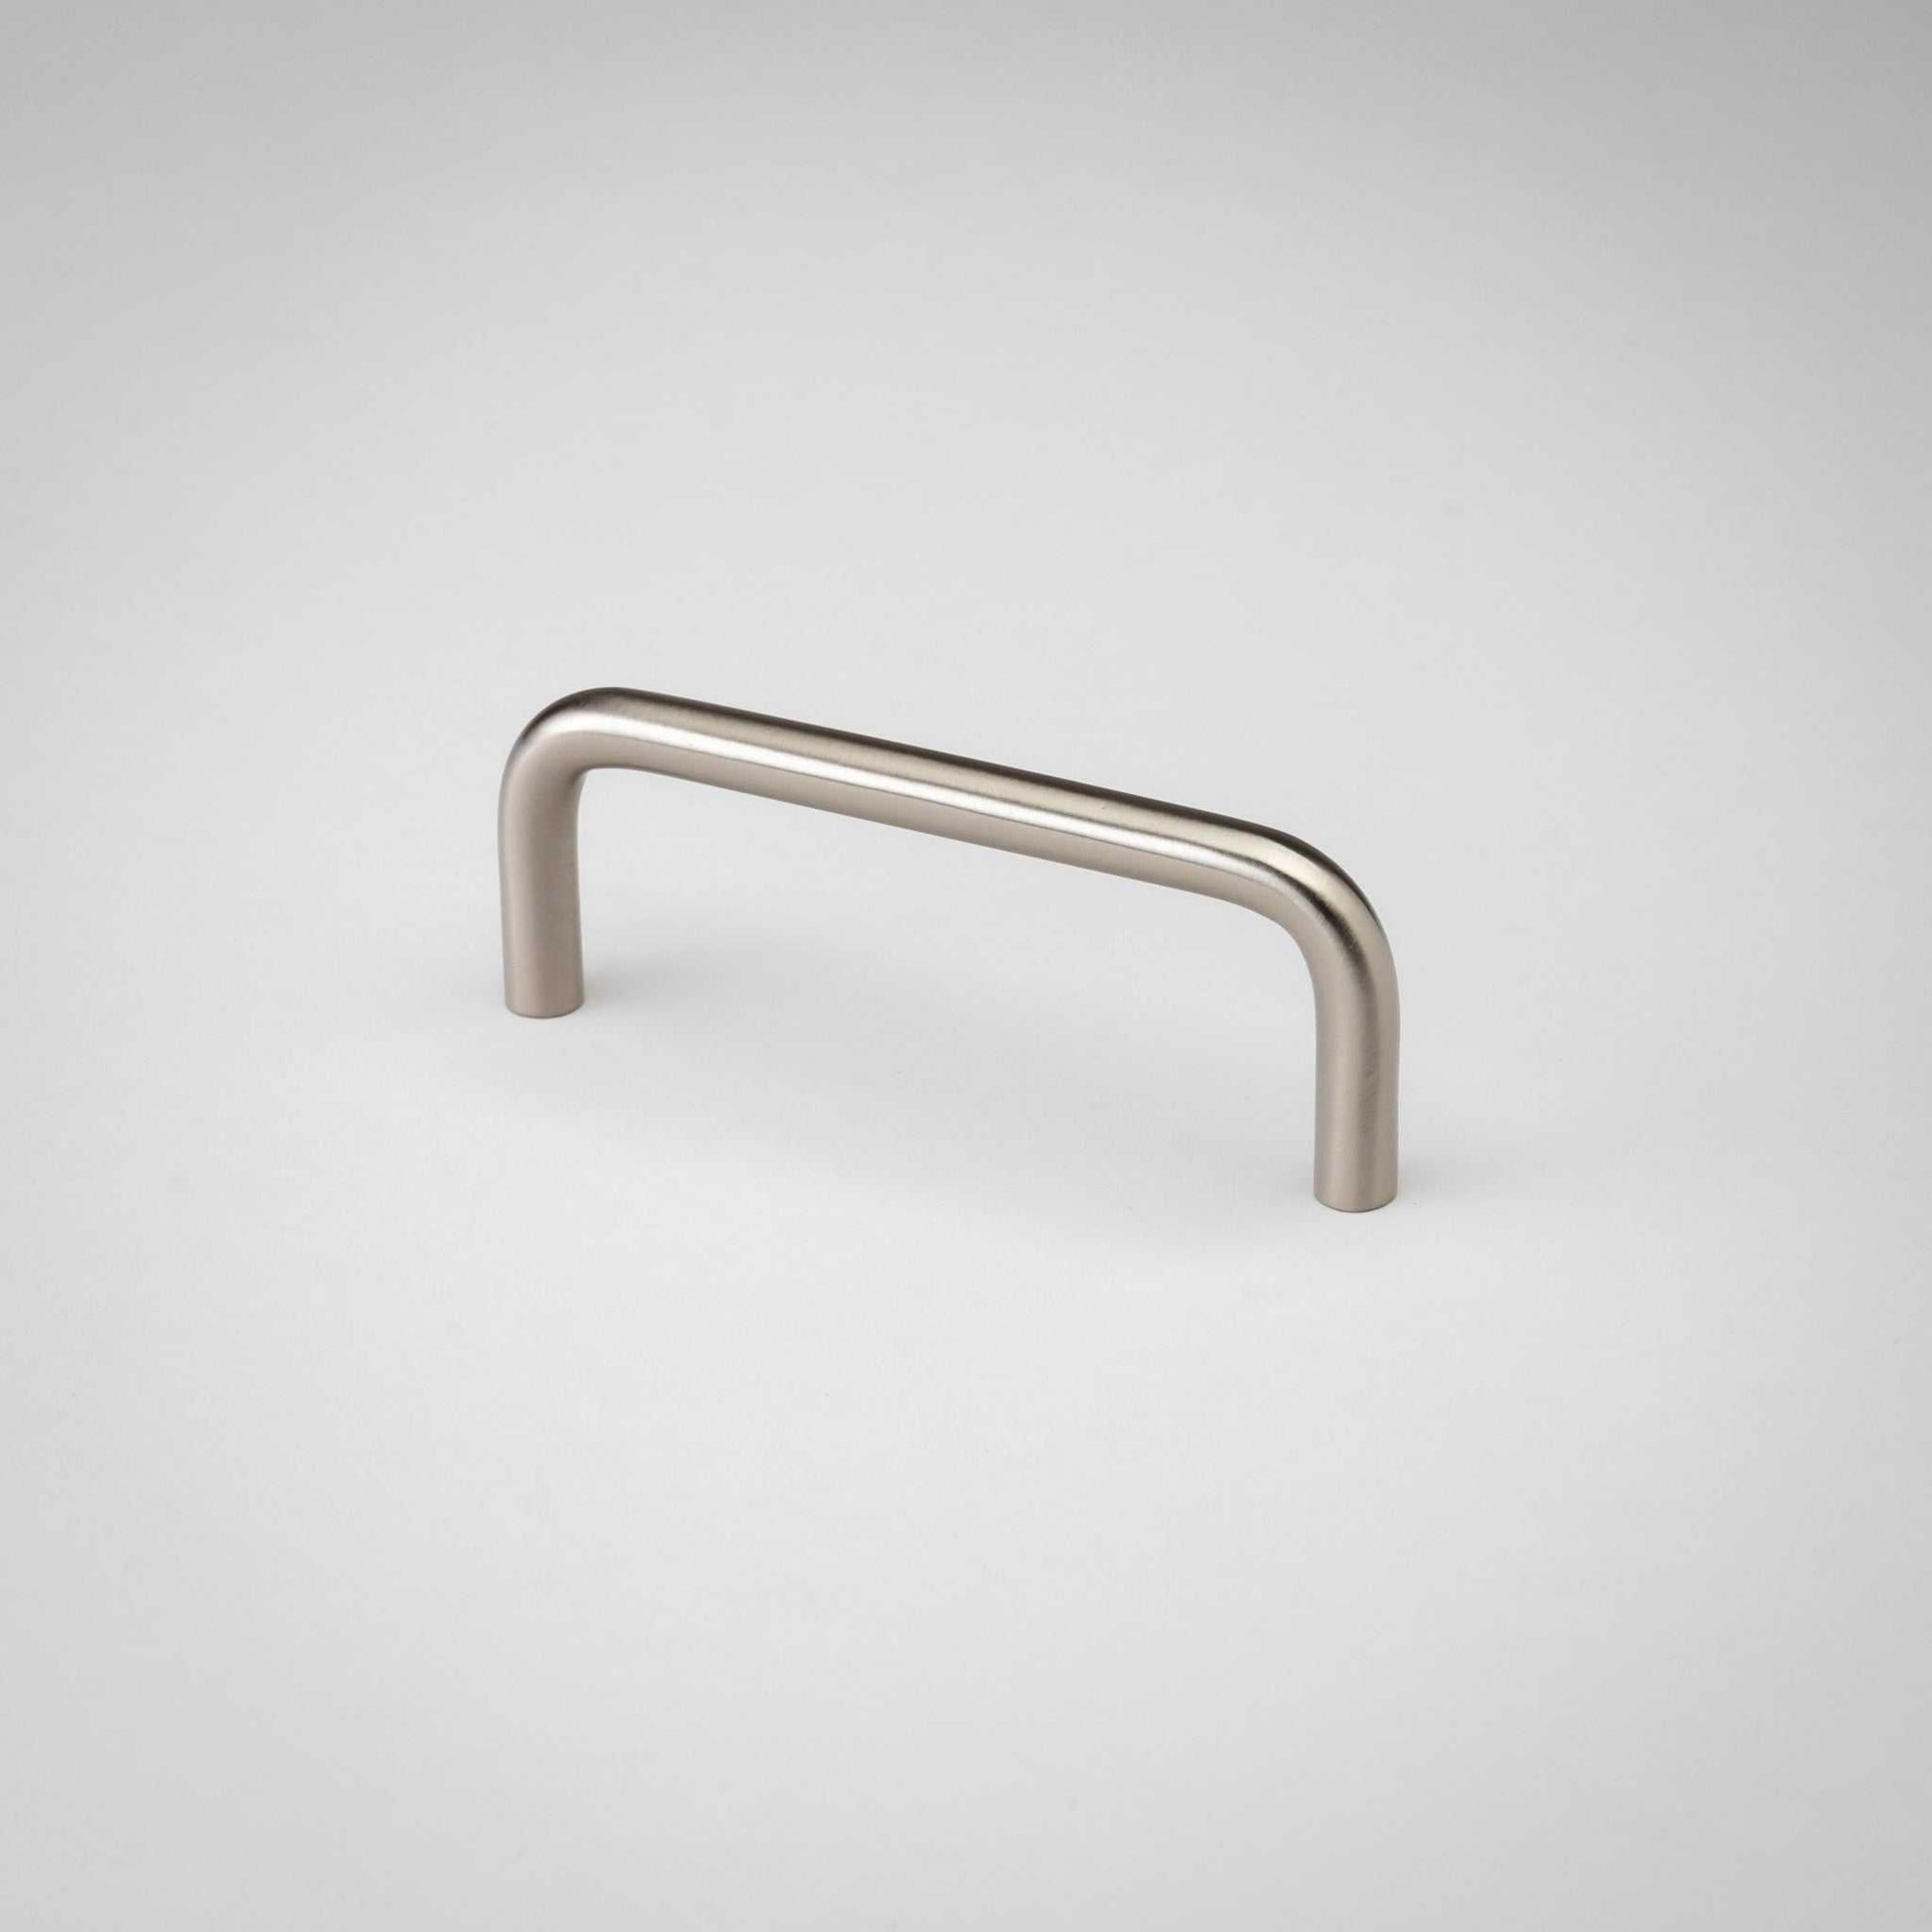 Arch, Solid Brass Wire Cabinet Pulls


Effortlessly beautiful, Arch pull brings a minimalist elegance to your kitchen or bath. Its solid brass construction gives this pieces a solid feel in the hand, wpullArch, Solid Brass Wire Cabinet Pulls